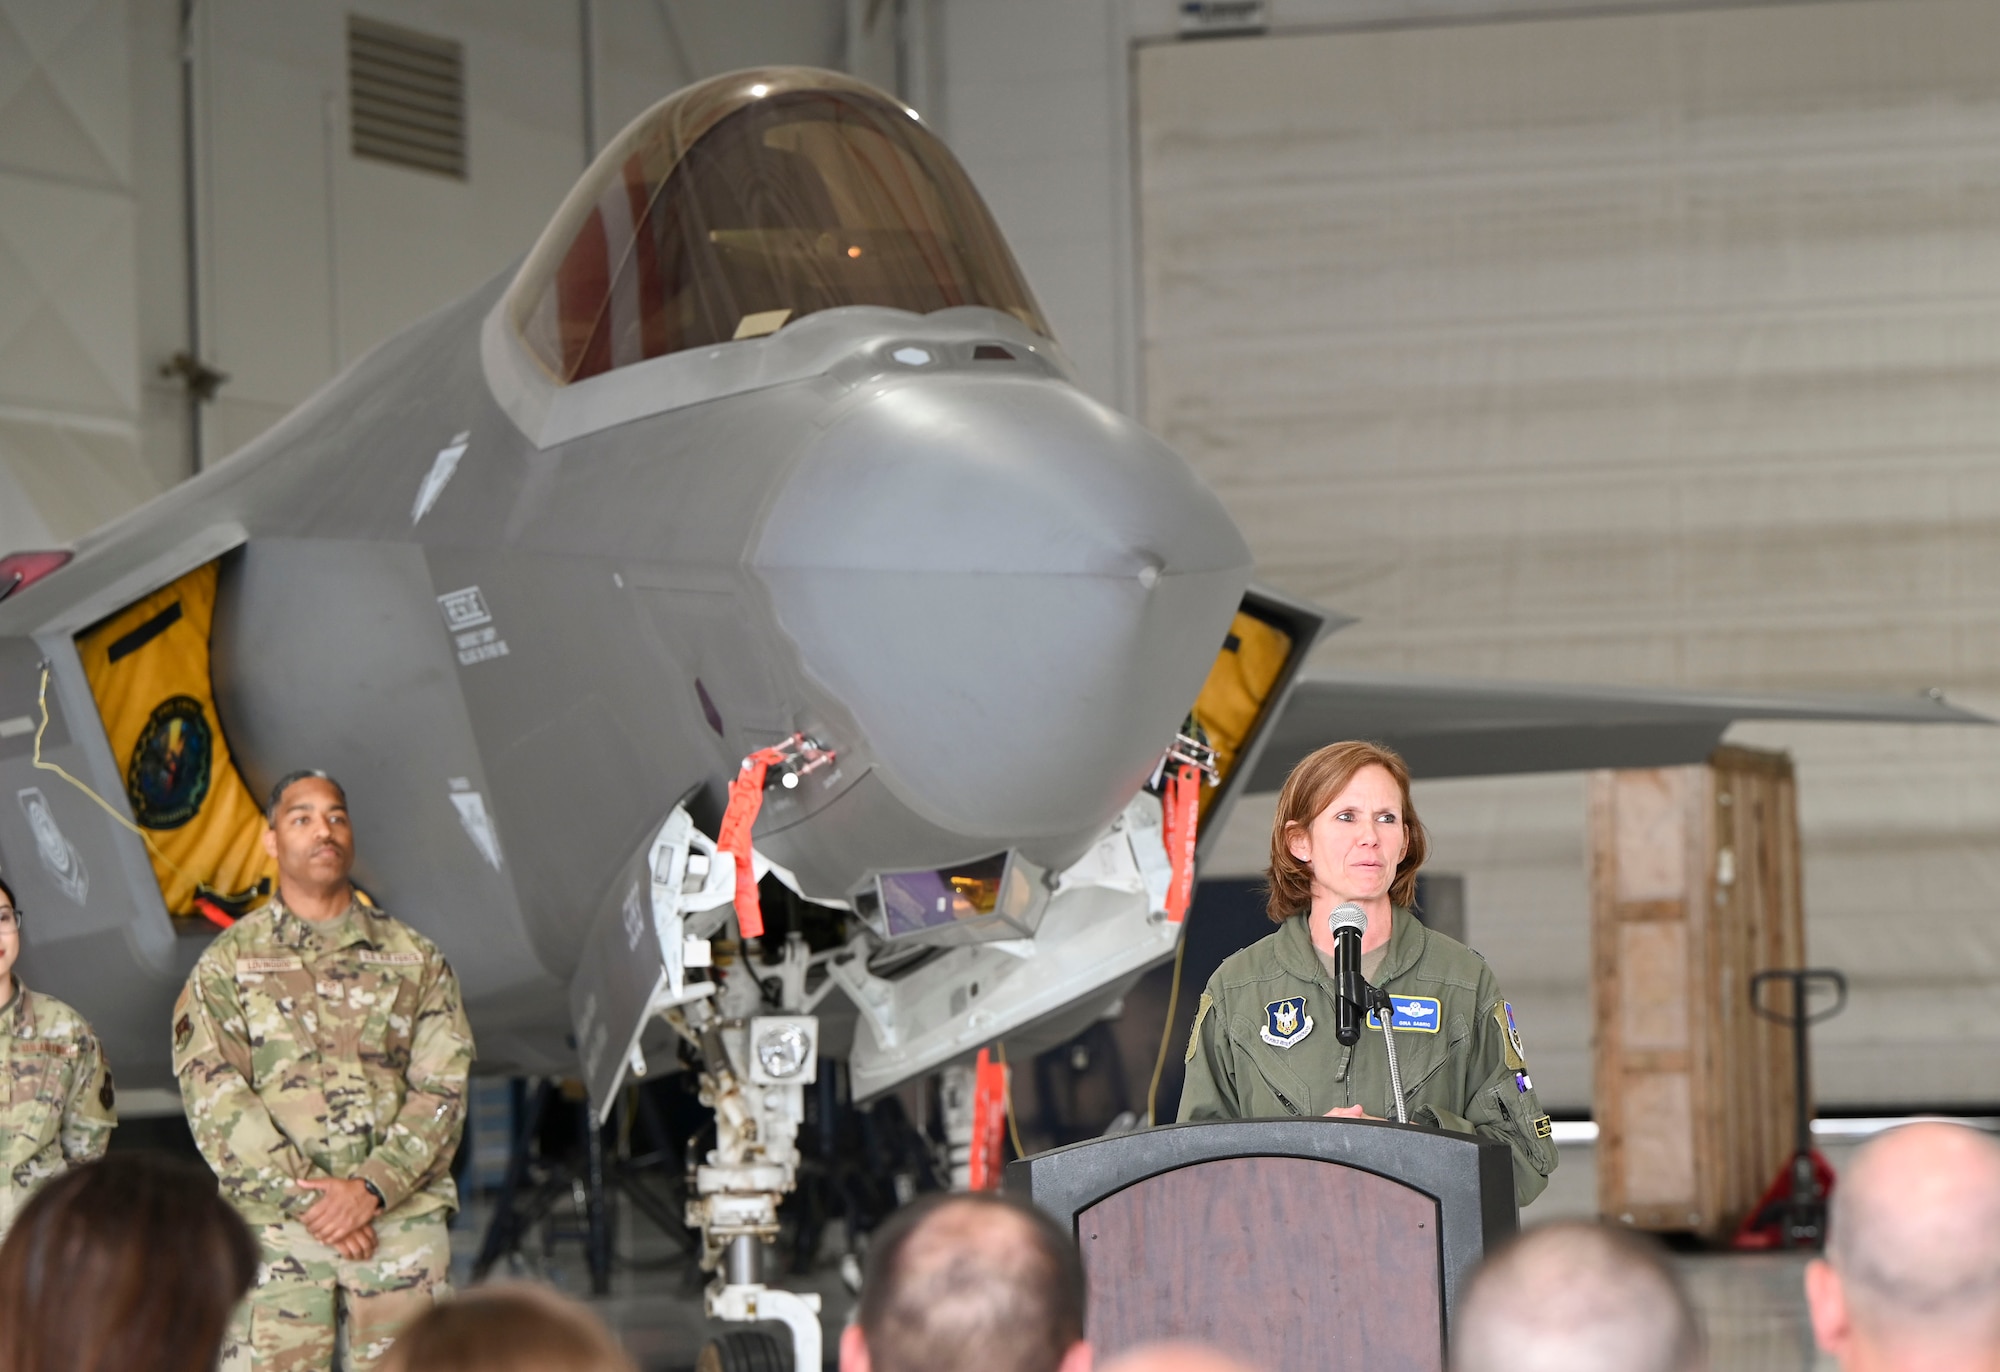 Brig. Gen. Regina Sabric speaks while standing at a podium. An F-35 aircraft is staged behind her.